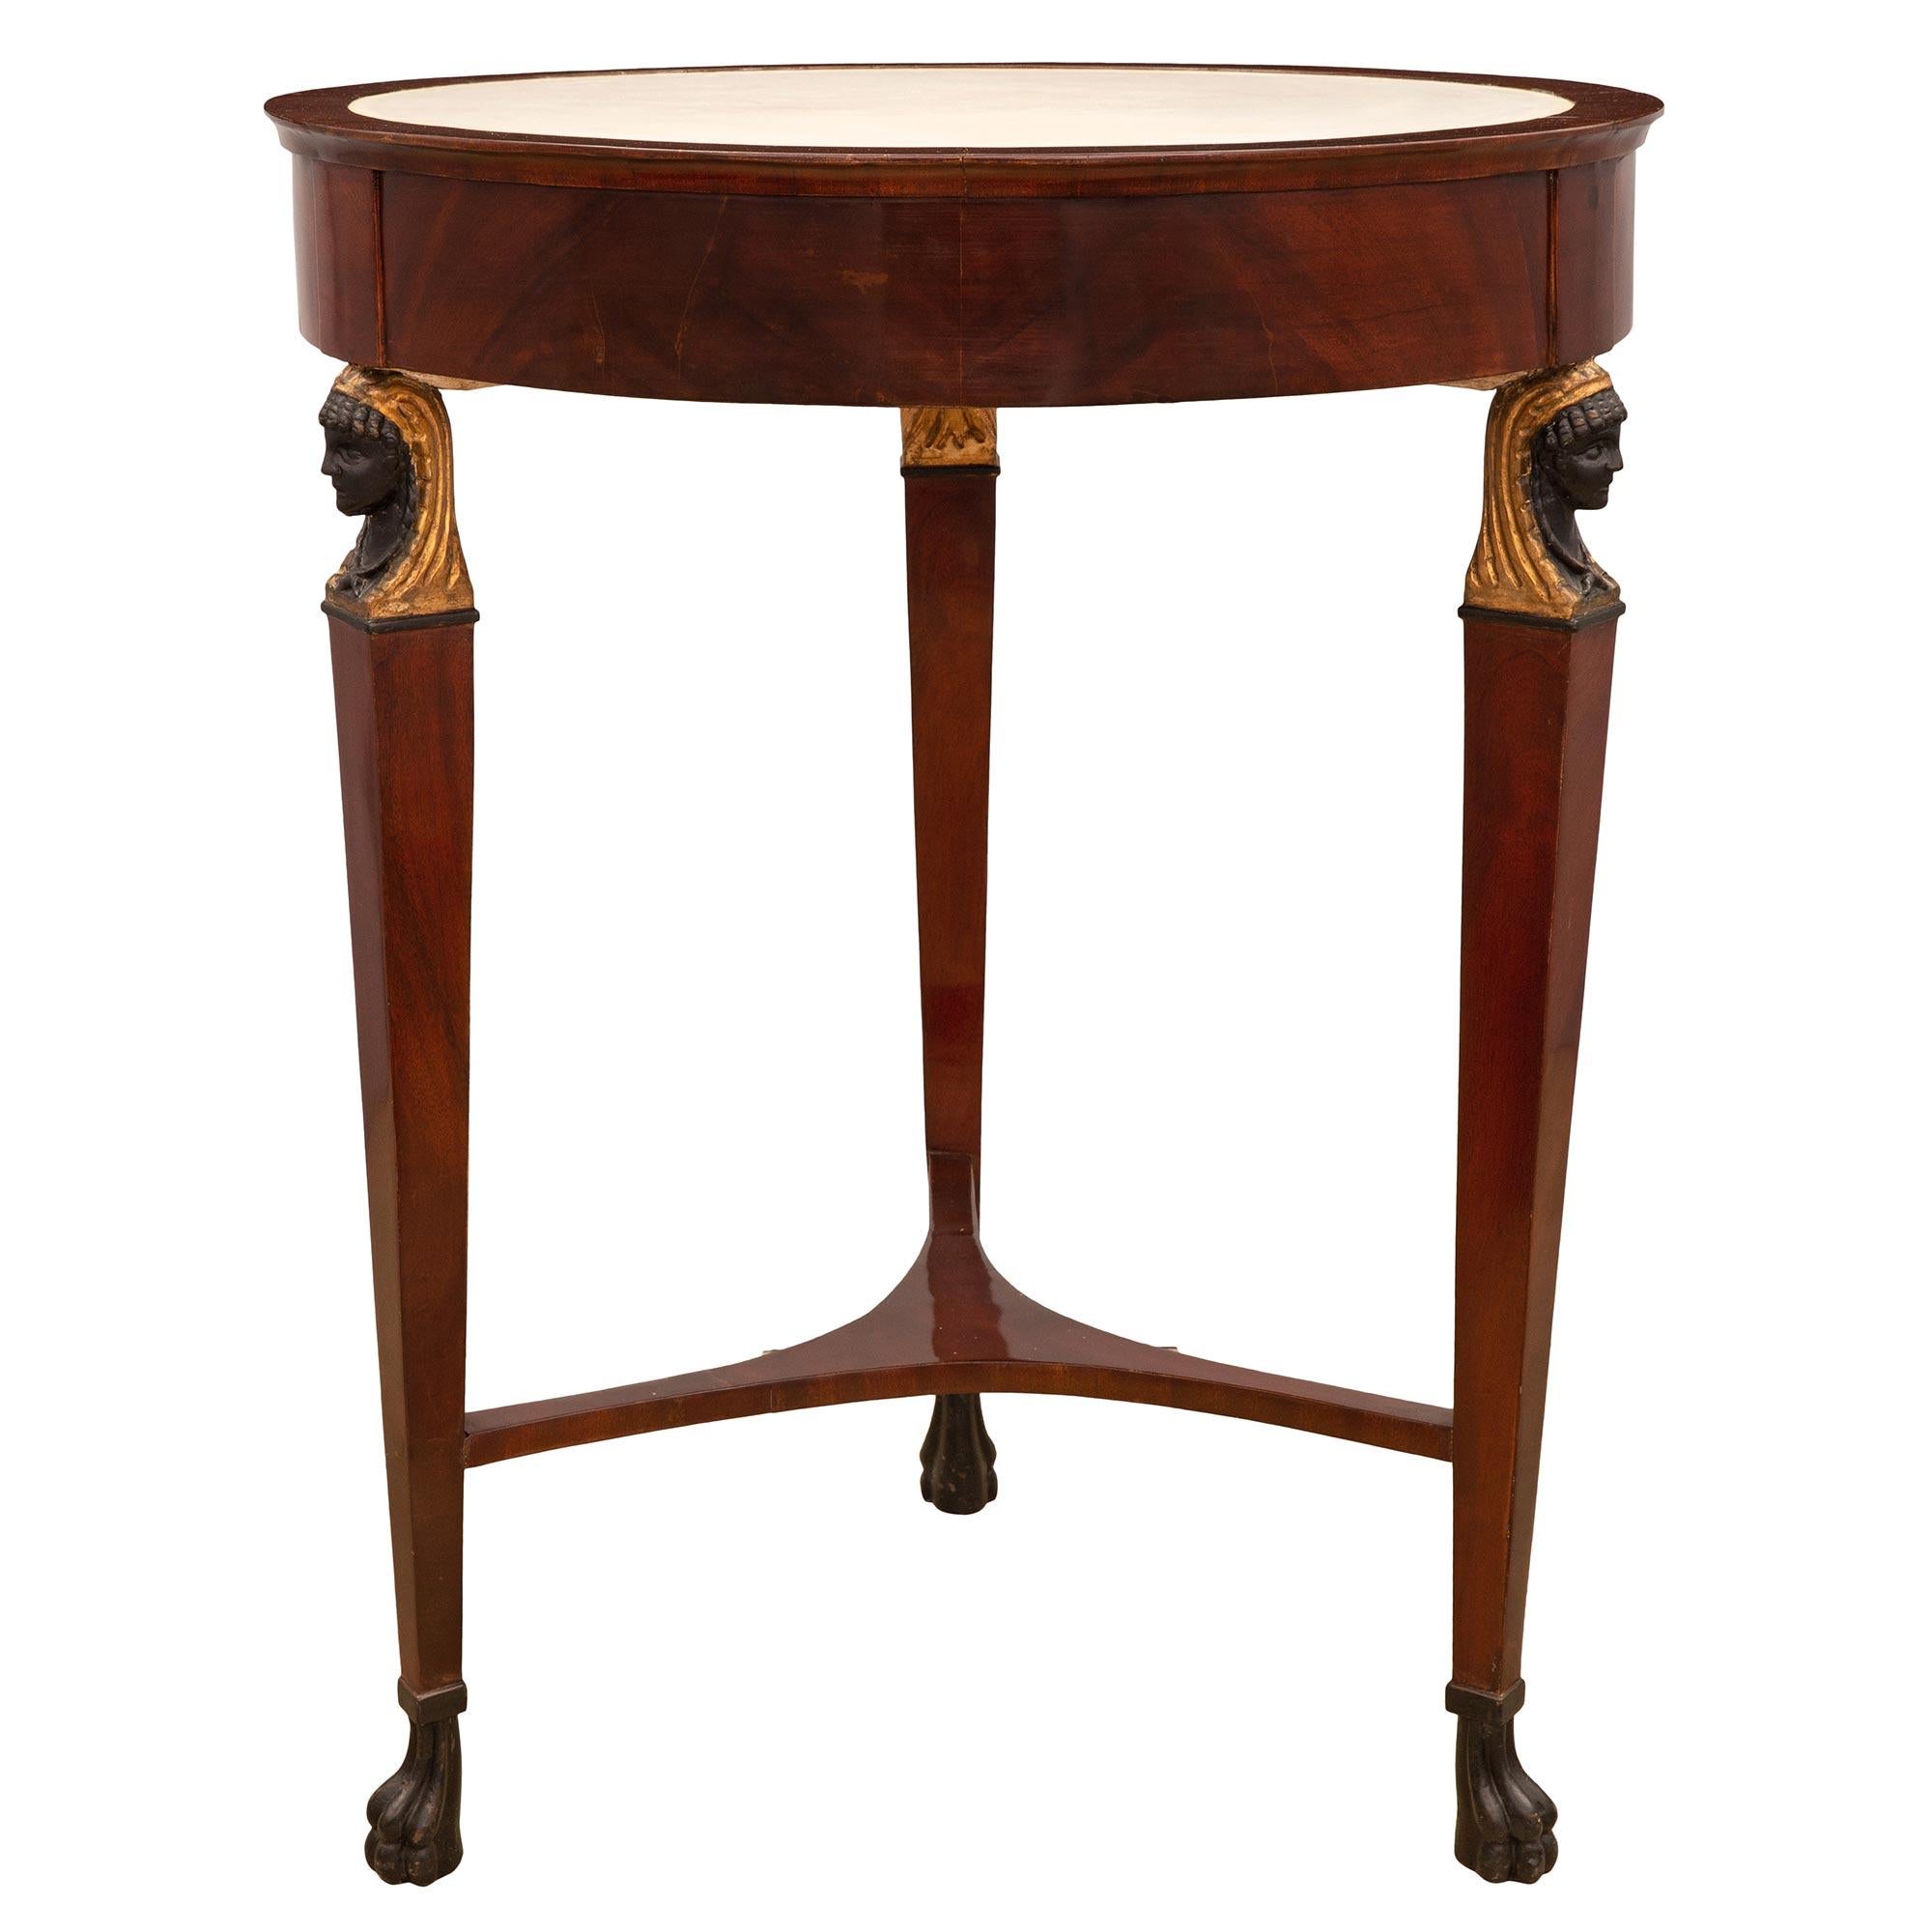 Italian Mid-19th Century Empire St. Circular Mahogany Center Table In Good Condition For Sale In West Palm Beach, FL